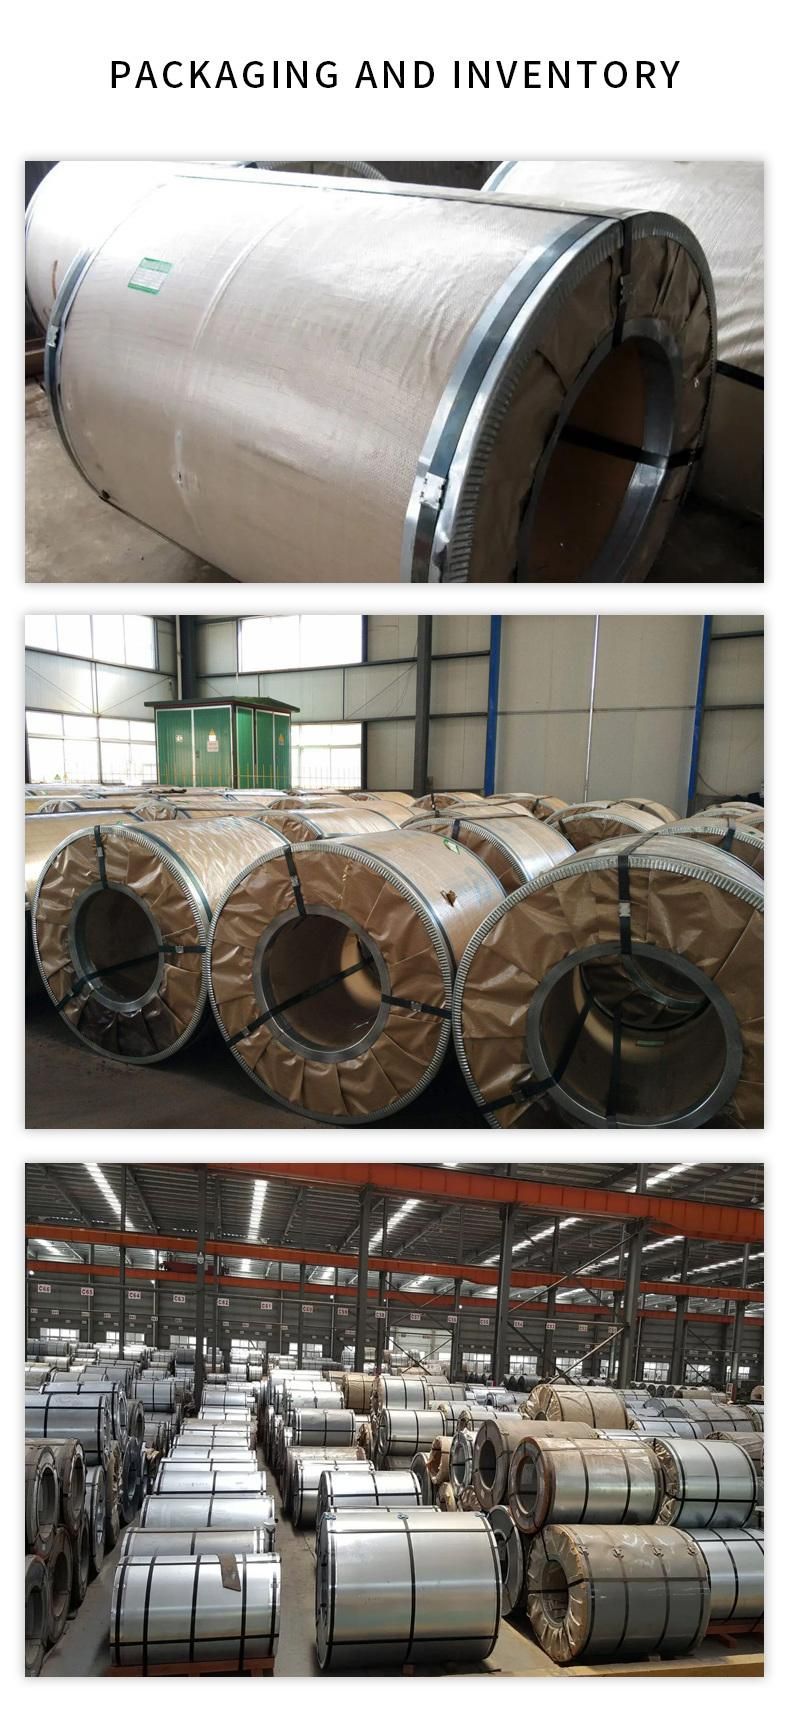 Welded Structural Steel Sm400 Sm490 Sm520 JIS G3106 Hot Rolled Steel in Coil Cold Rolled SPCC Spfc DC01 DC02 DC04 DC06 Sk45 Steel Coil Cold Rolled SPCC Spfc Coi